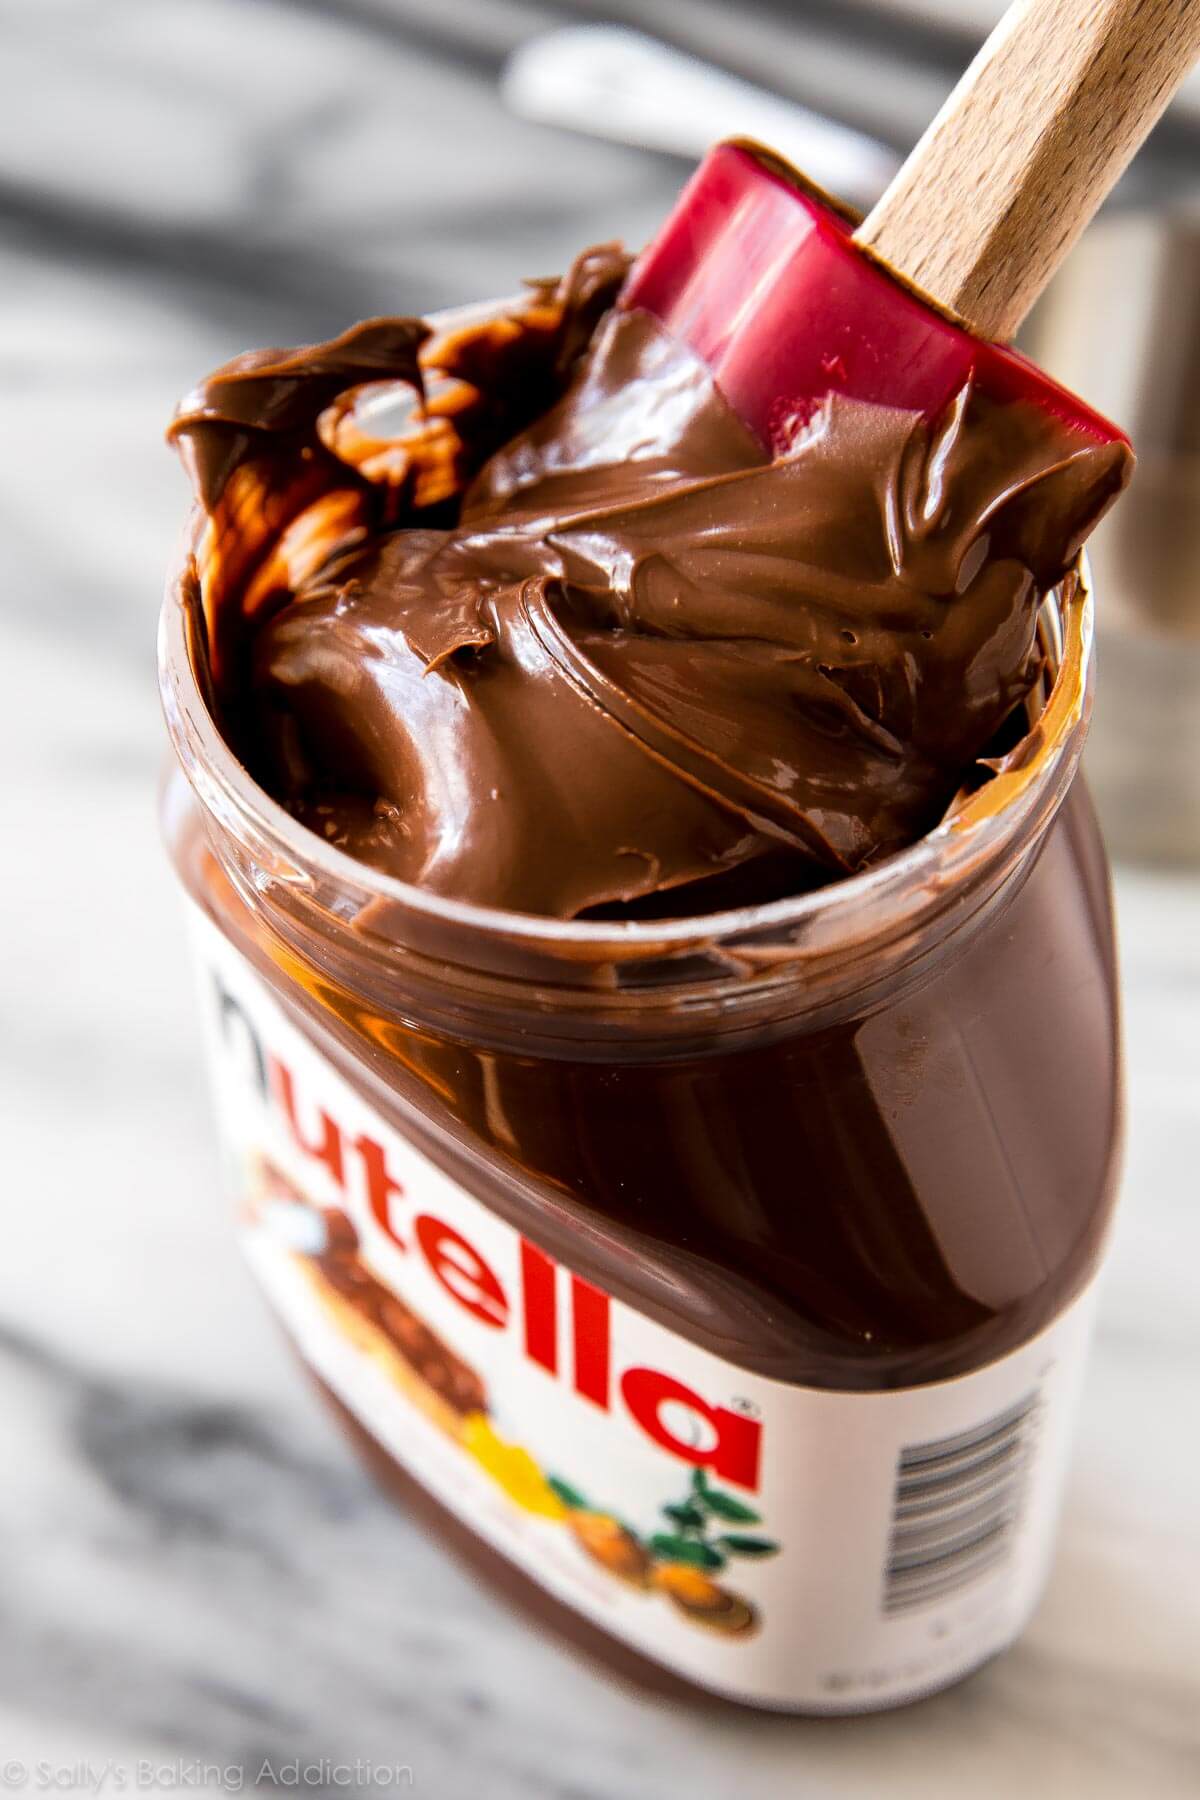 Nutella container with a red spatula